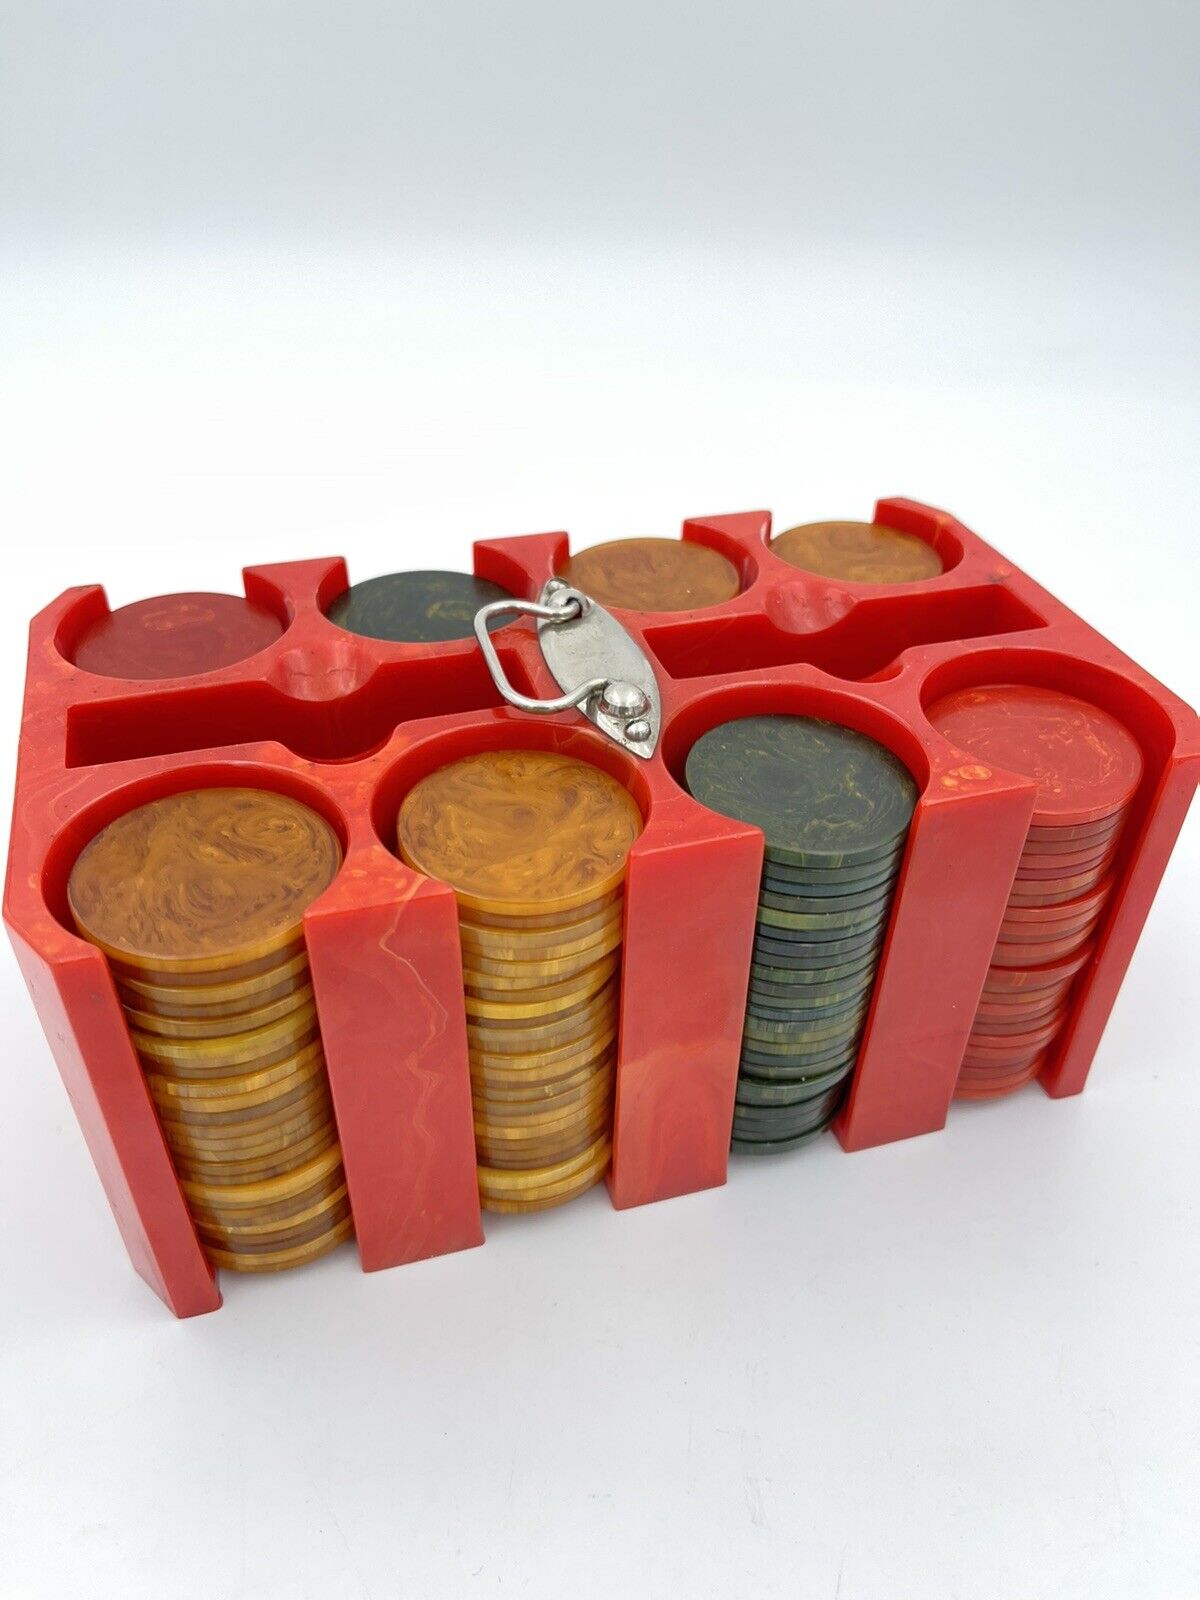 Vintage Red Bakelite Catalin Poker Chip Caddy - Yellow/Green/Red Swirled Chips